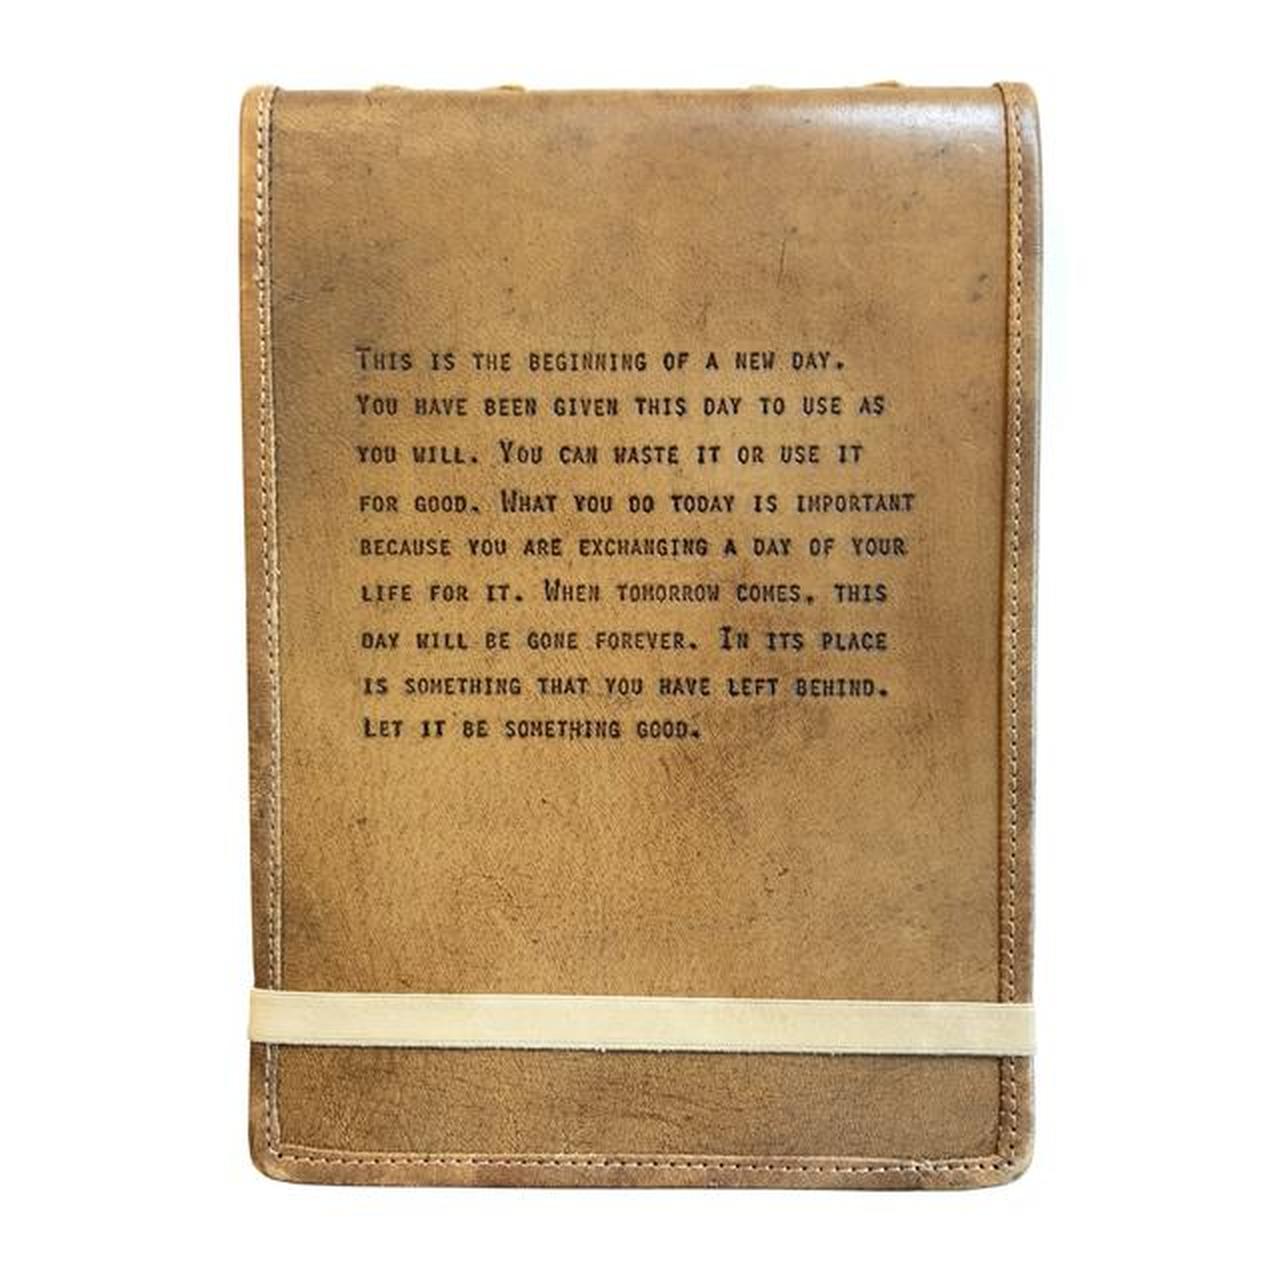 Sugarboo Leather Journals